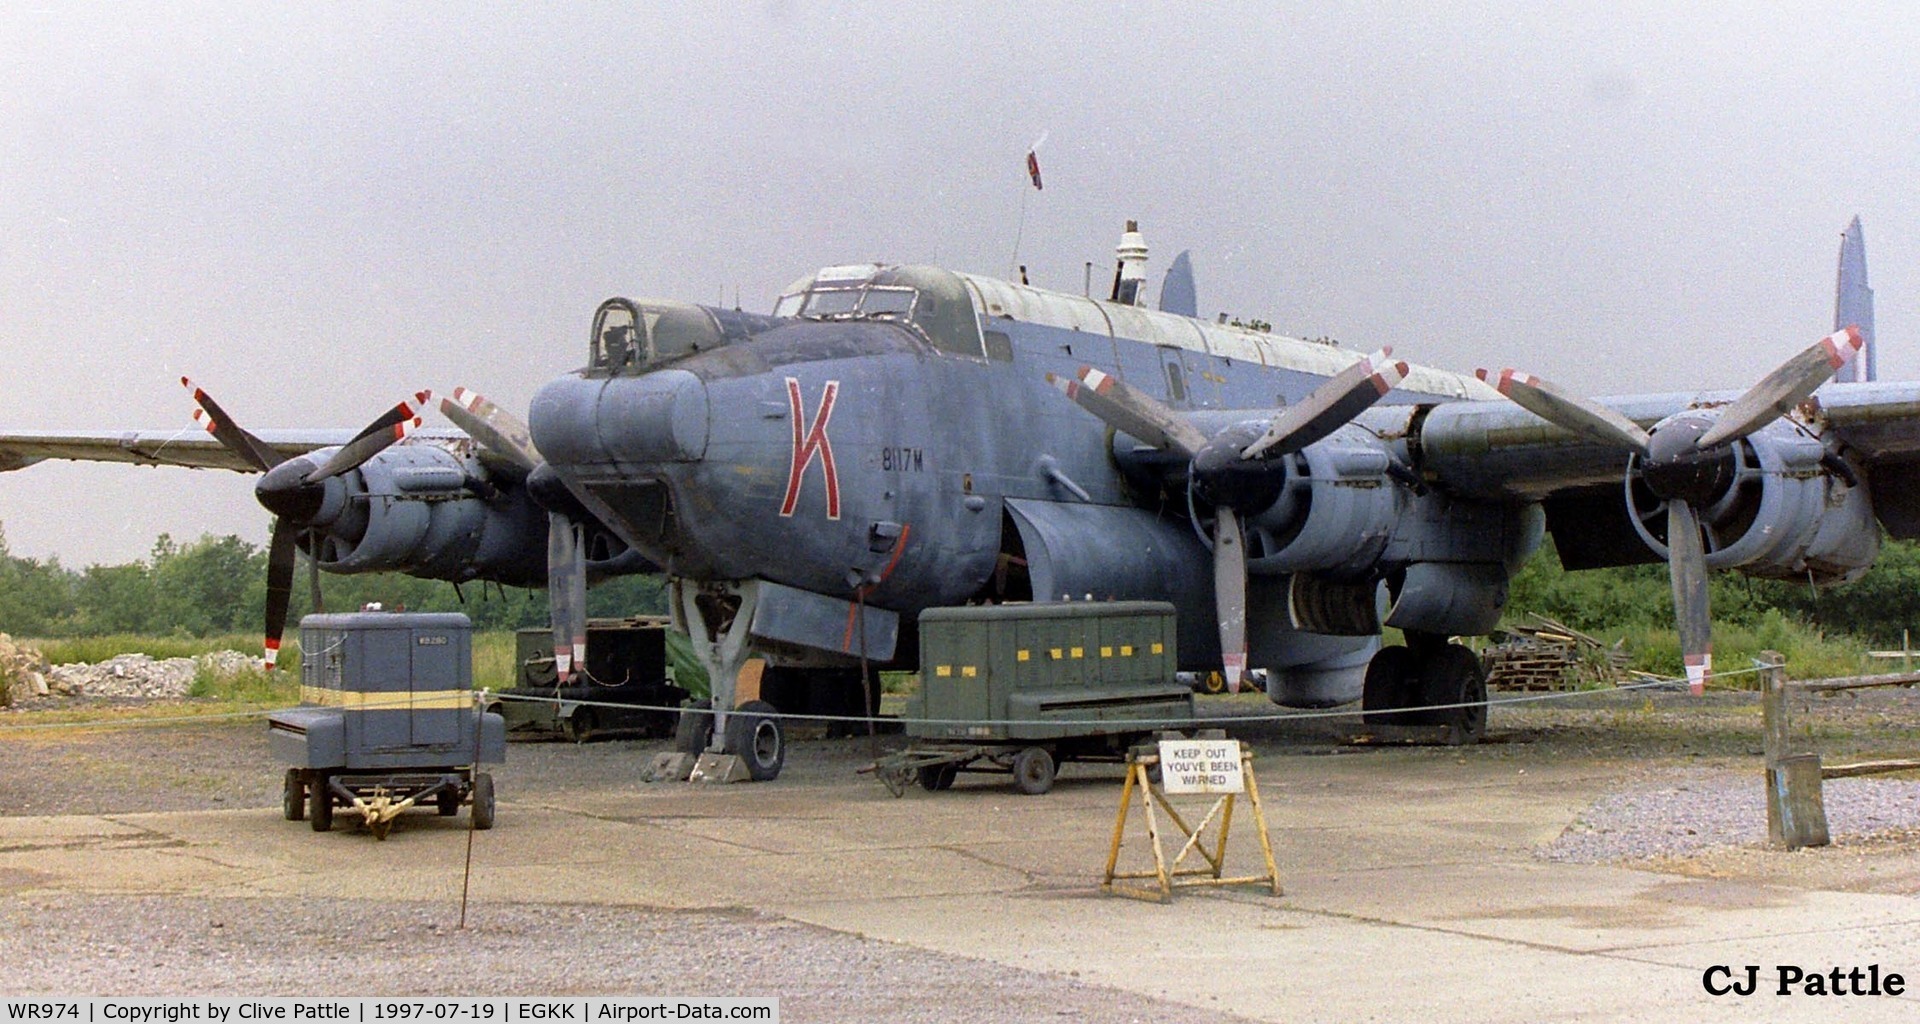 WR974, 1957 Avro 716 Shackleton MR.3/3 C/N Not found WR974, Scanned from neg. On display at Charlwood, Gatwick, Surrey UK. EGKK used for search purposes only.